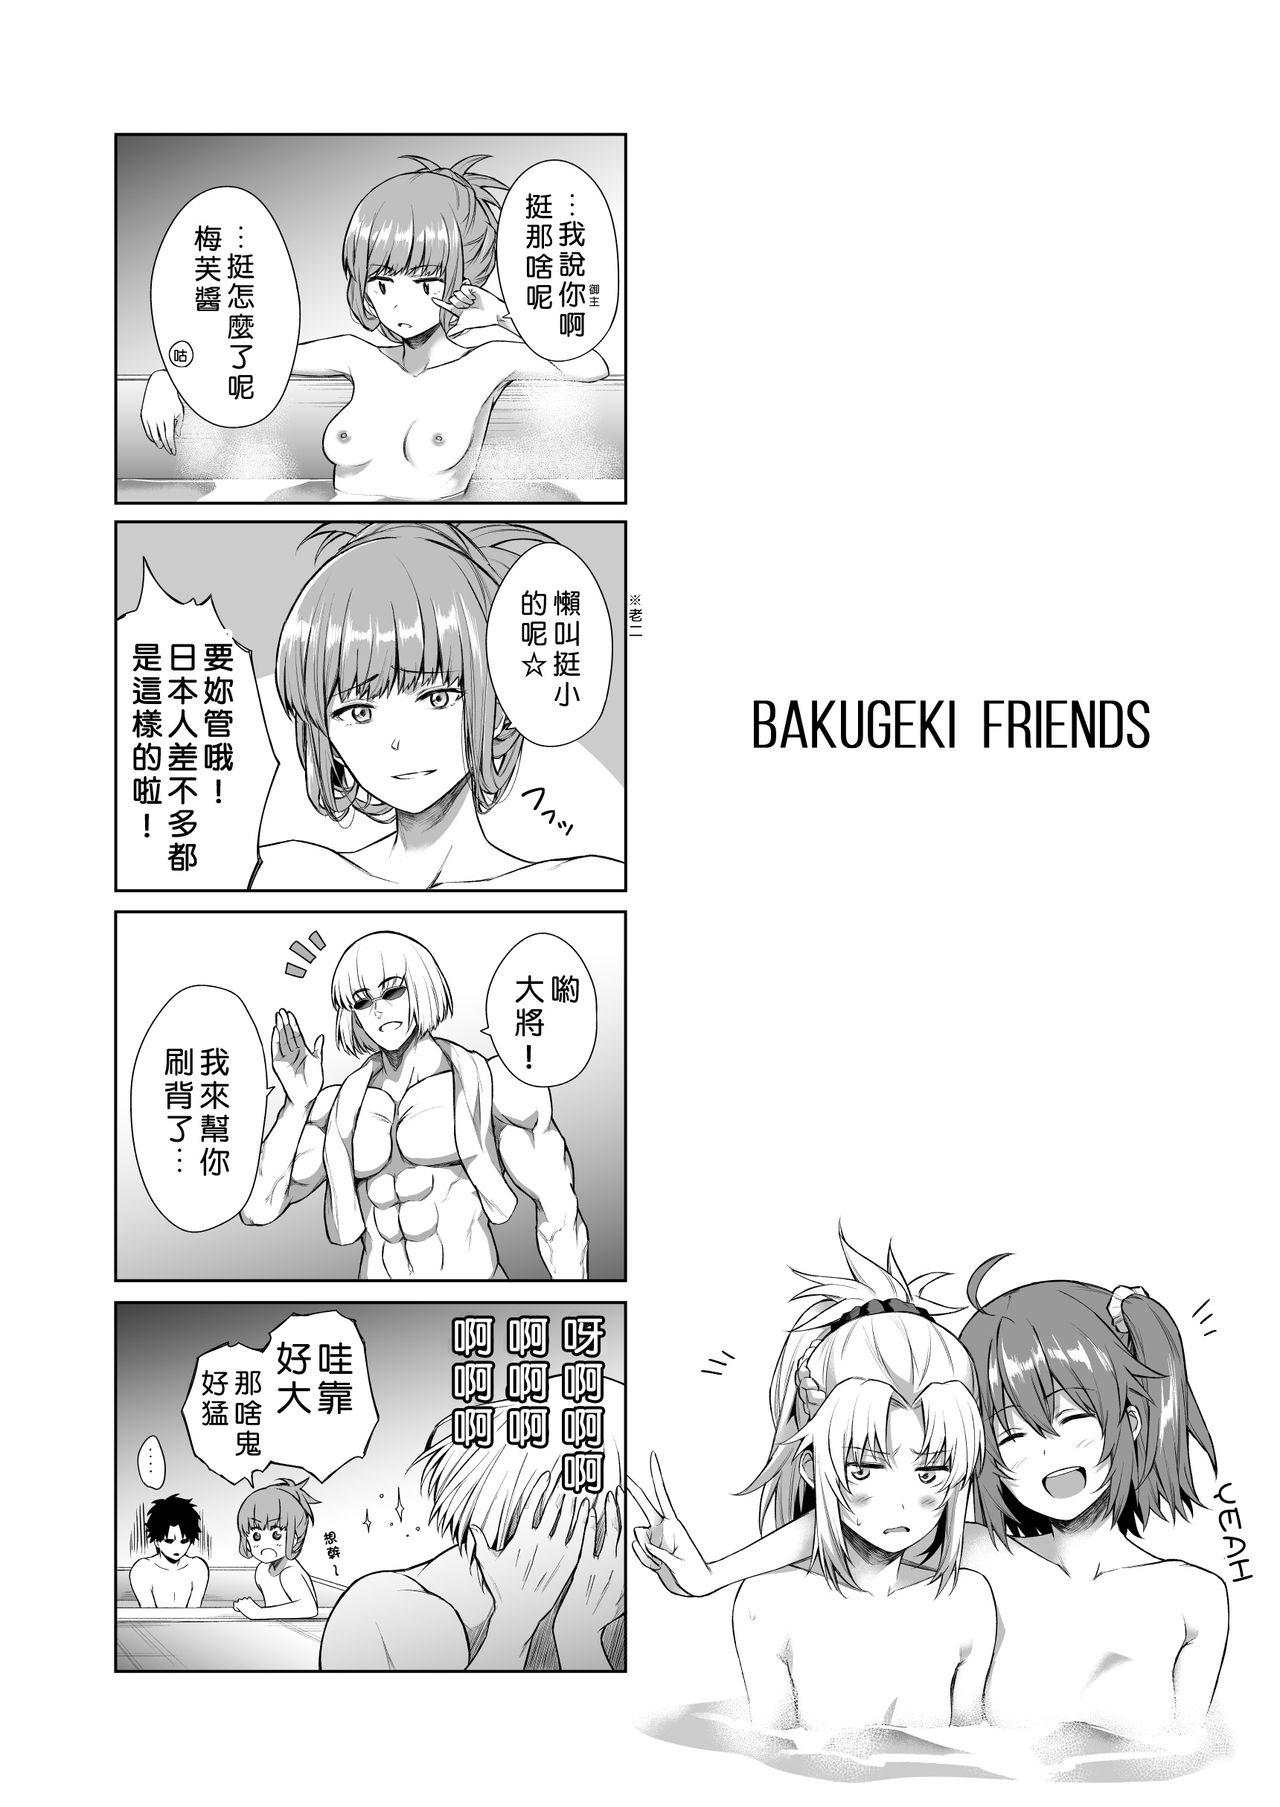 Nudist BAKUGEKI FRIENDS - Fate grand order Shaved Pussy - Page 2